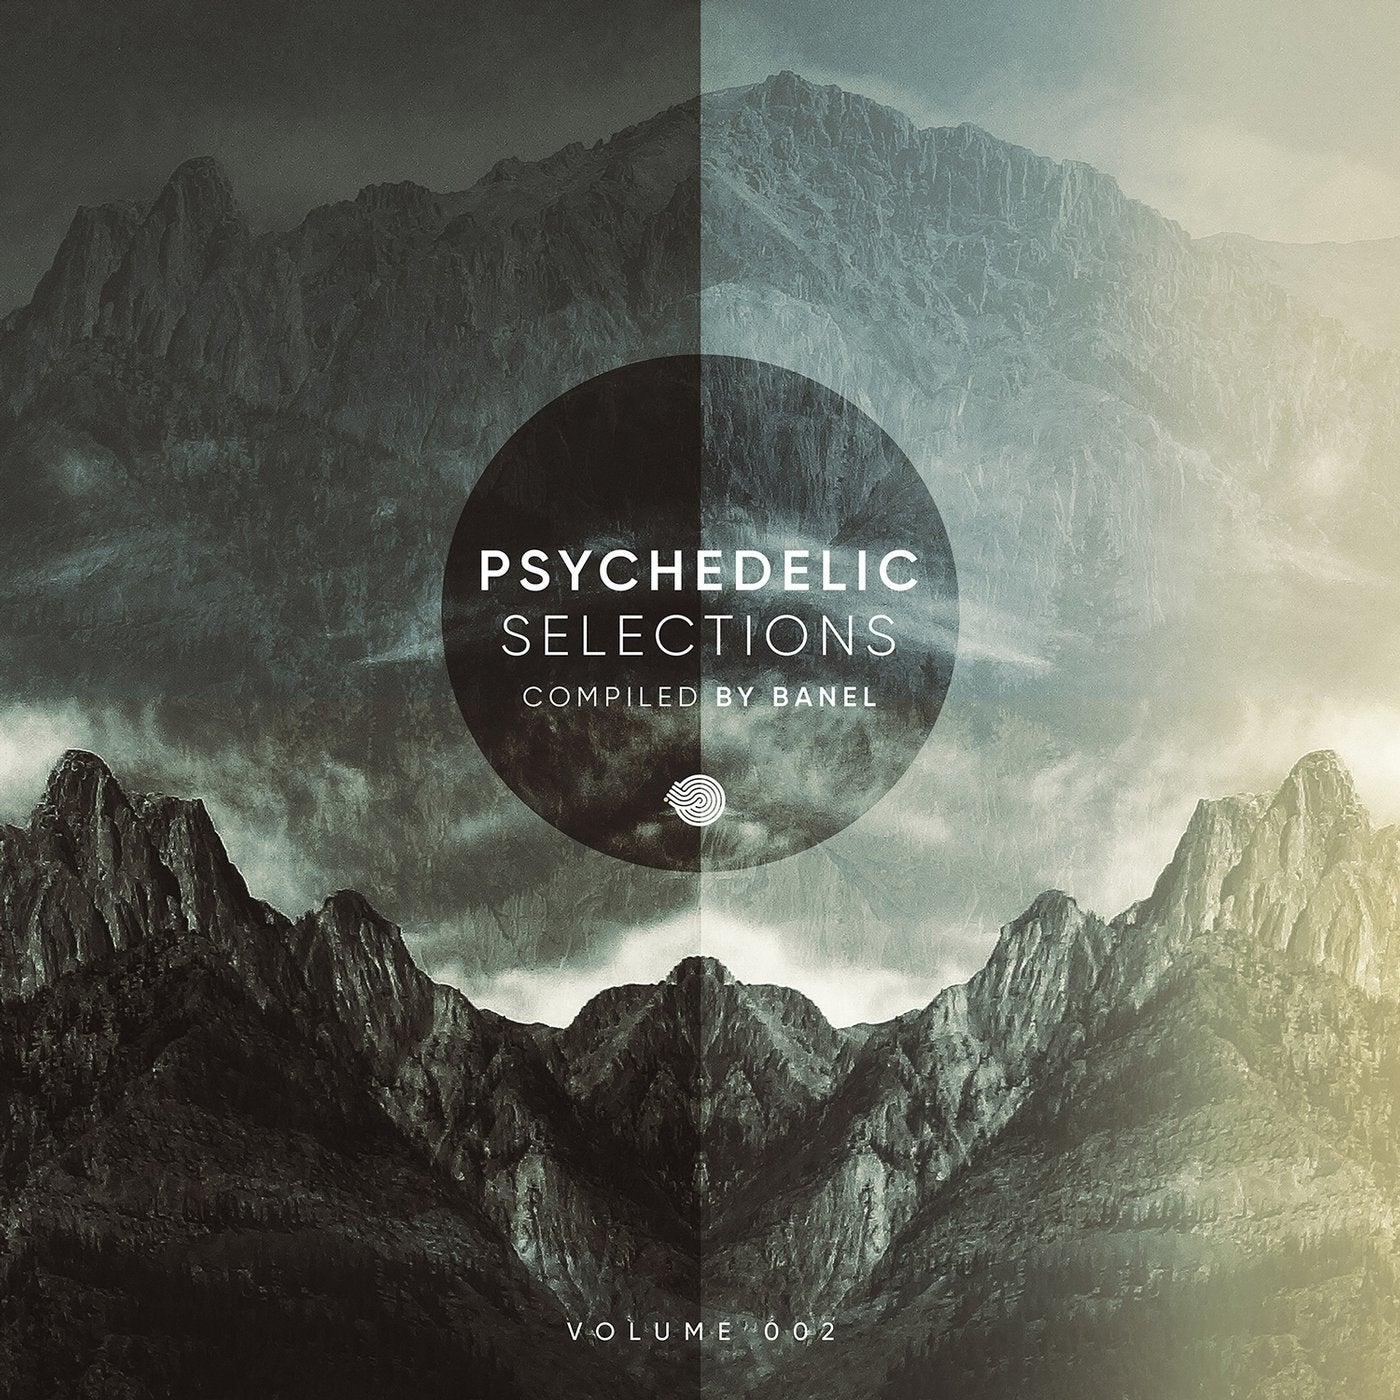 Psychedelic Selections Vol 002 Compiled by Banel